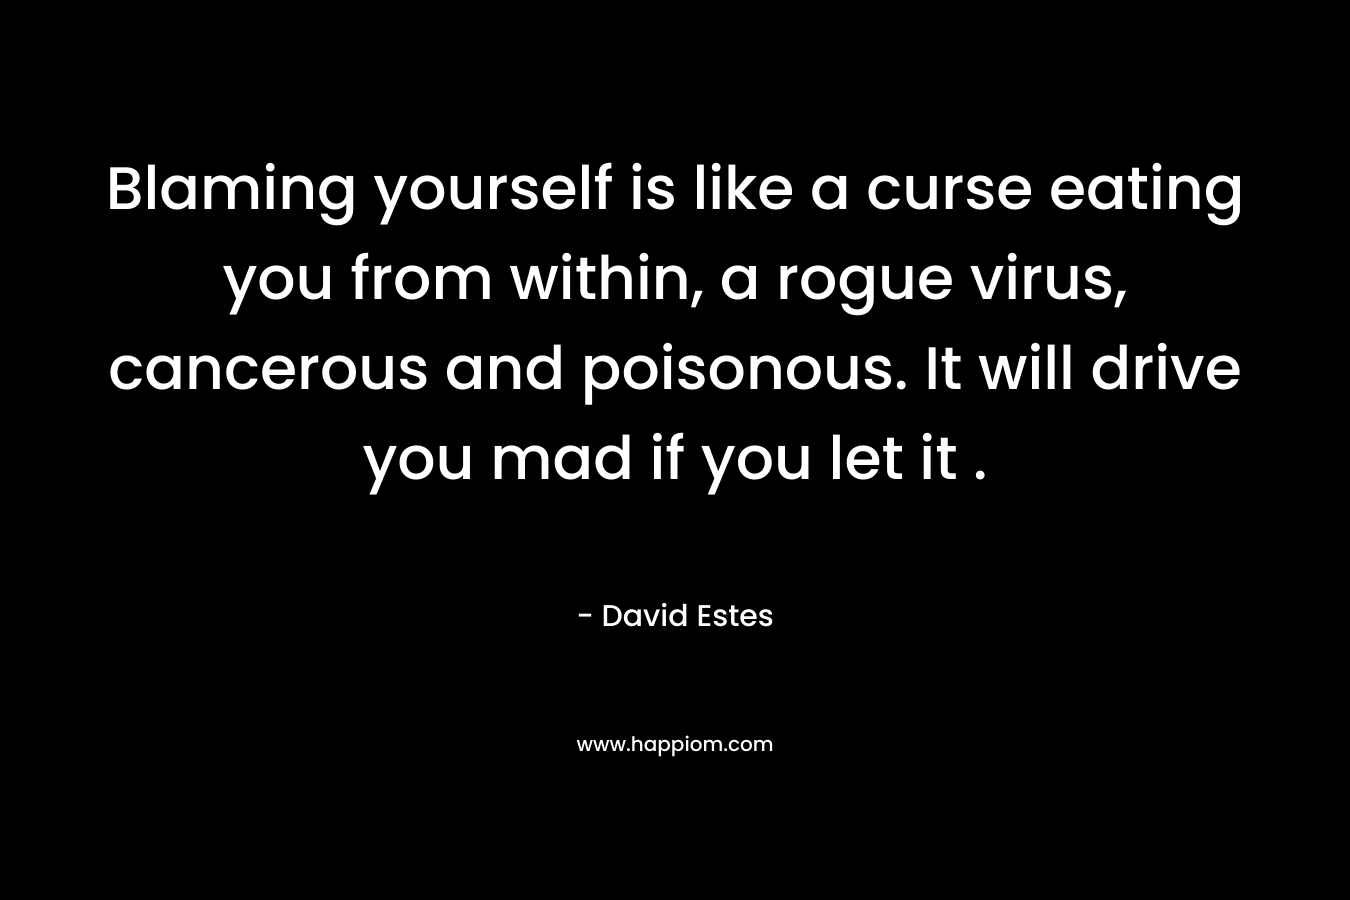 Blaming yourself is like a curse eating you from within, a rogue virus, cancerous and poisonous. It will drive you mad if you let it . – David Estes